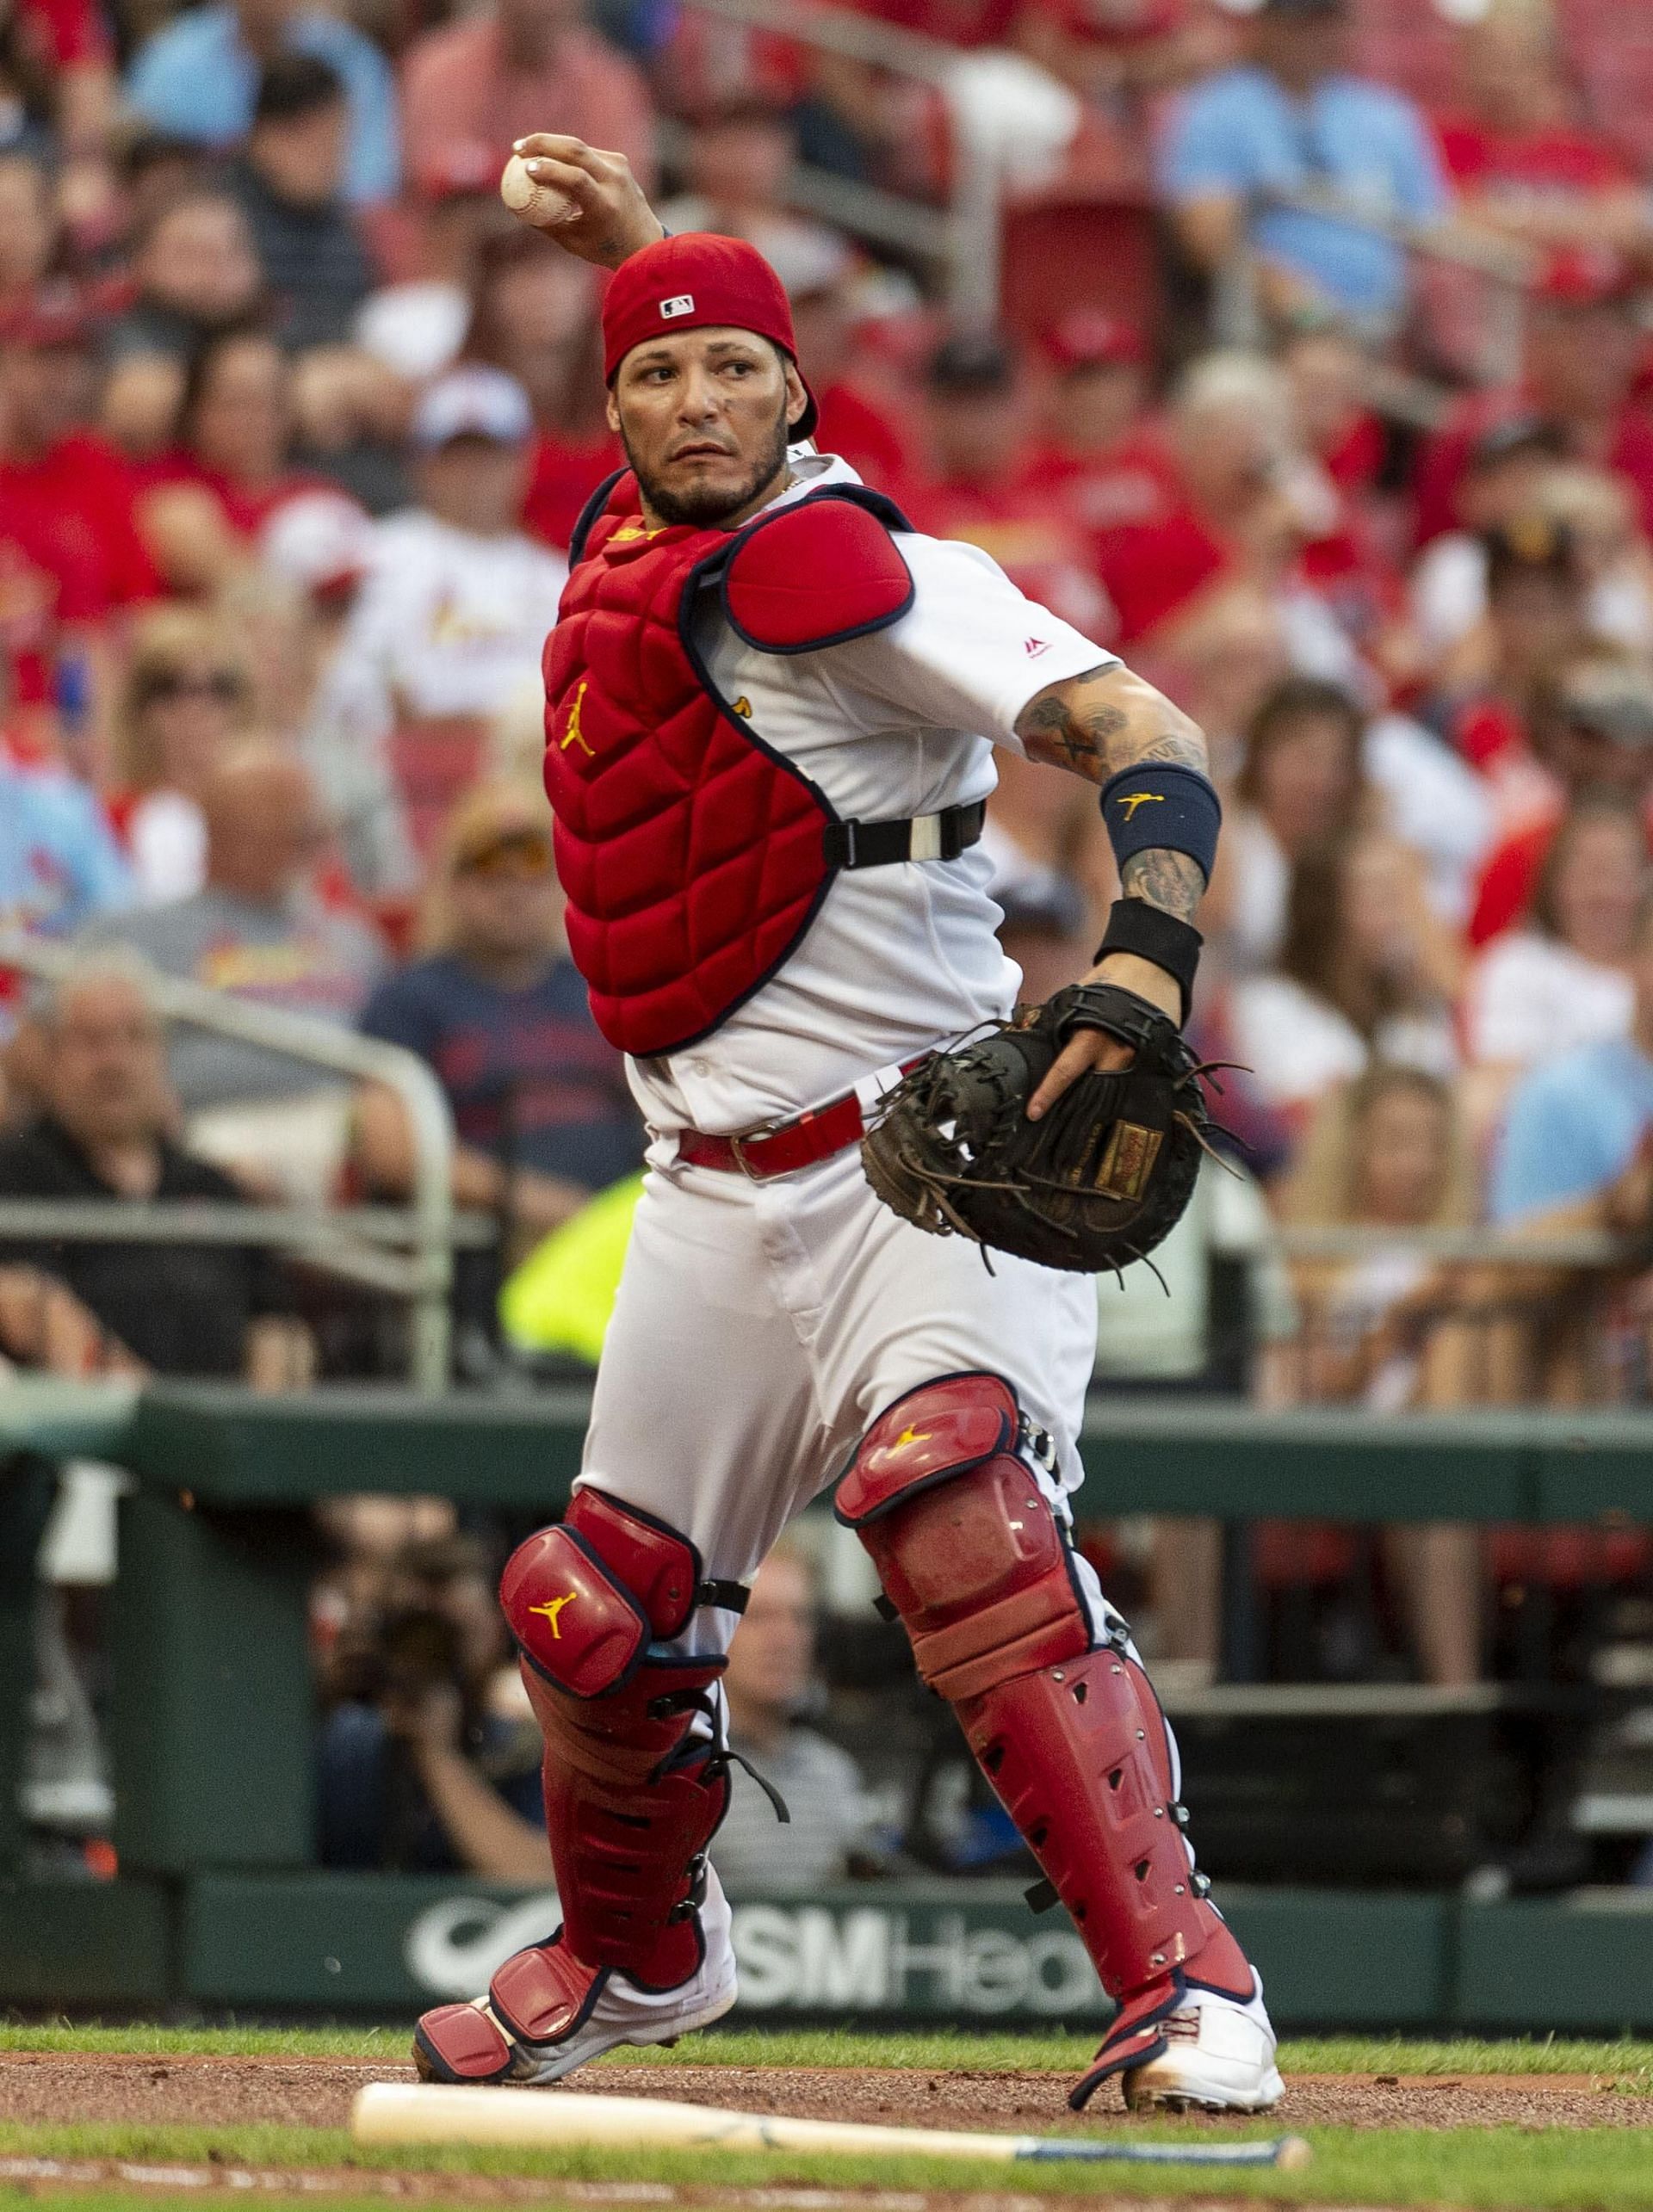 Yadier Molina in Cardinals shirt (credits: the spokesperson review)